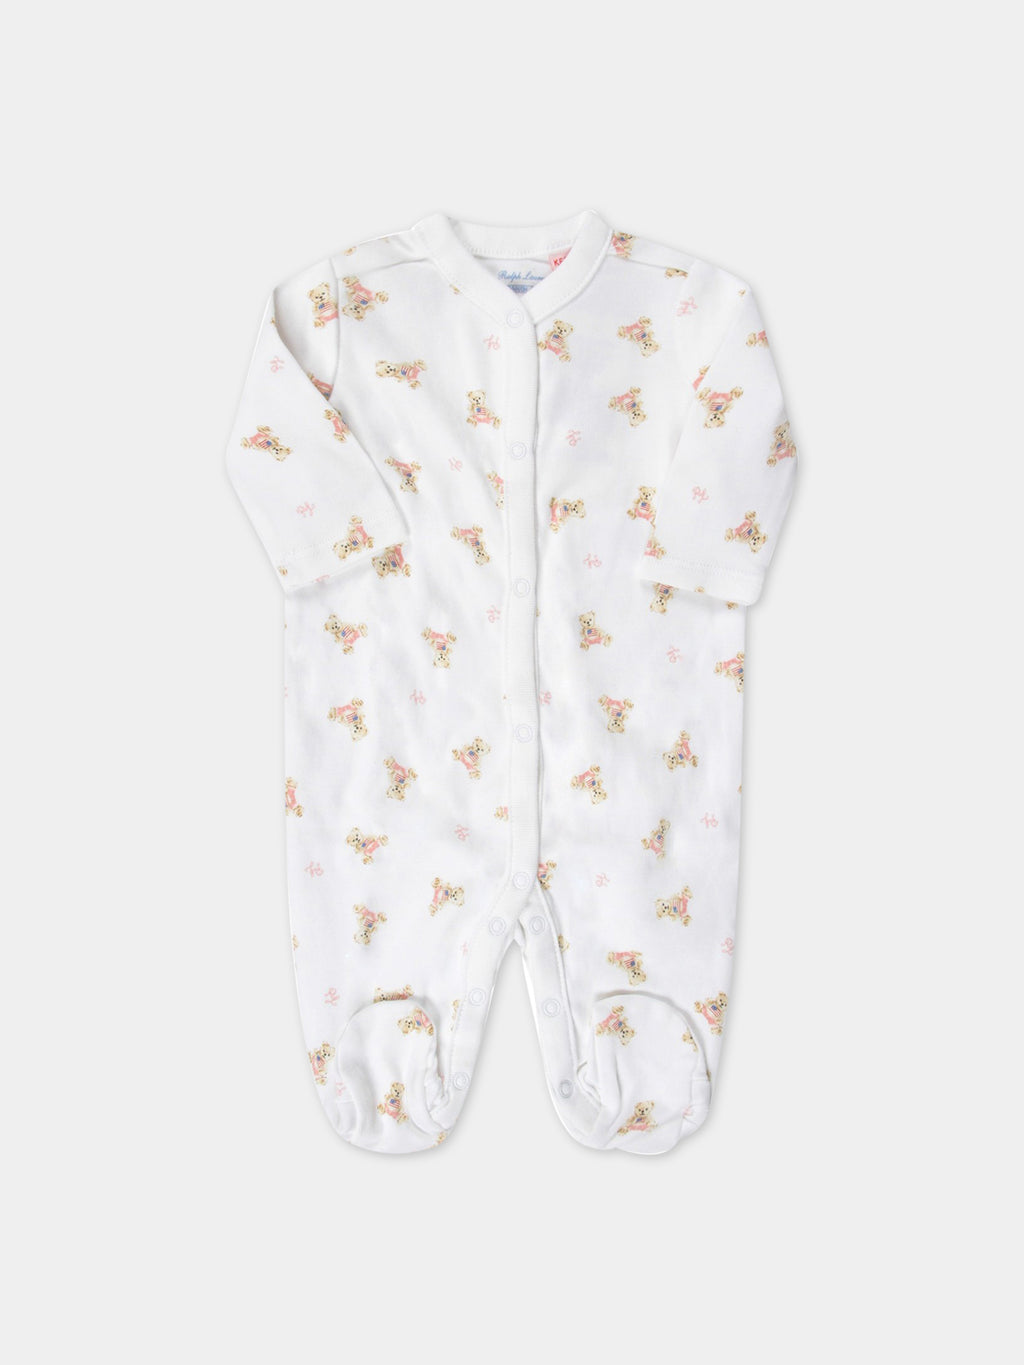 White babygrow for baby girl with pink logo and Teddy Bear